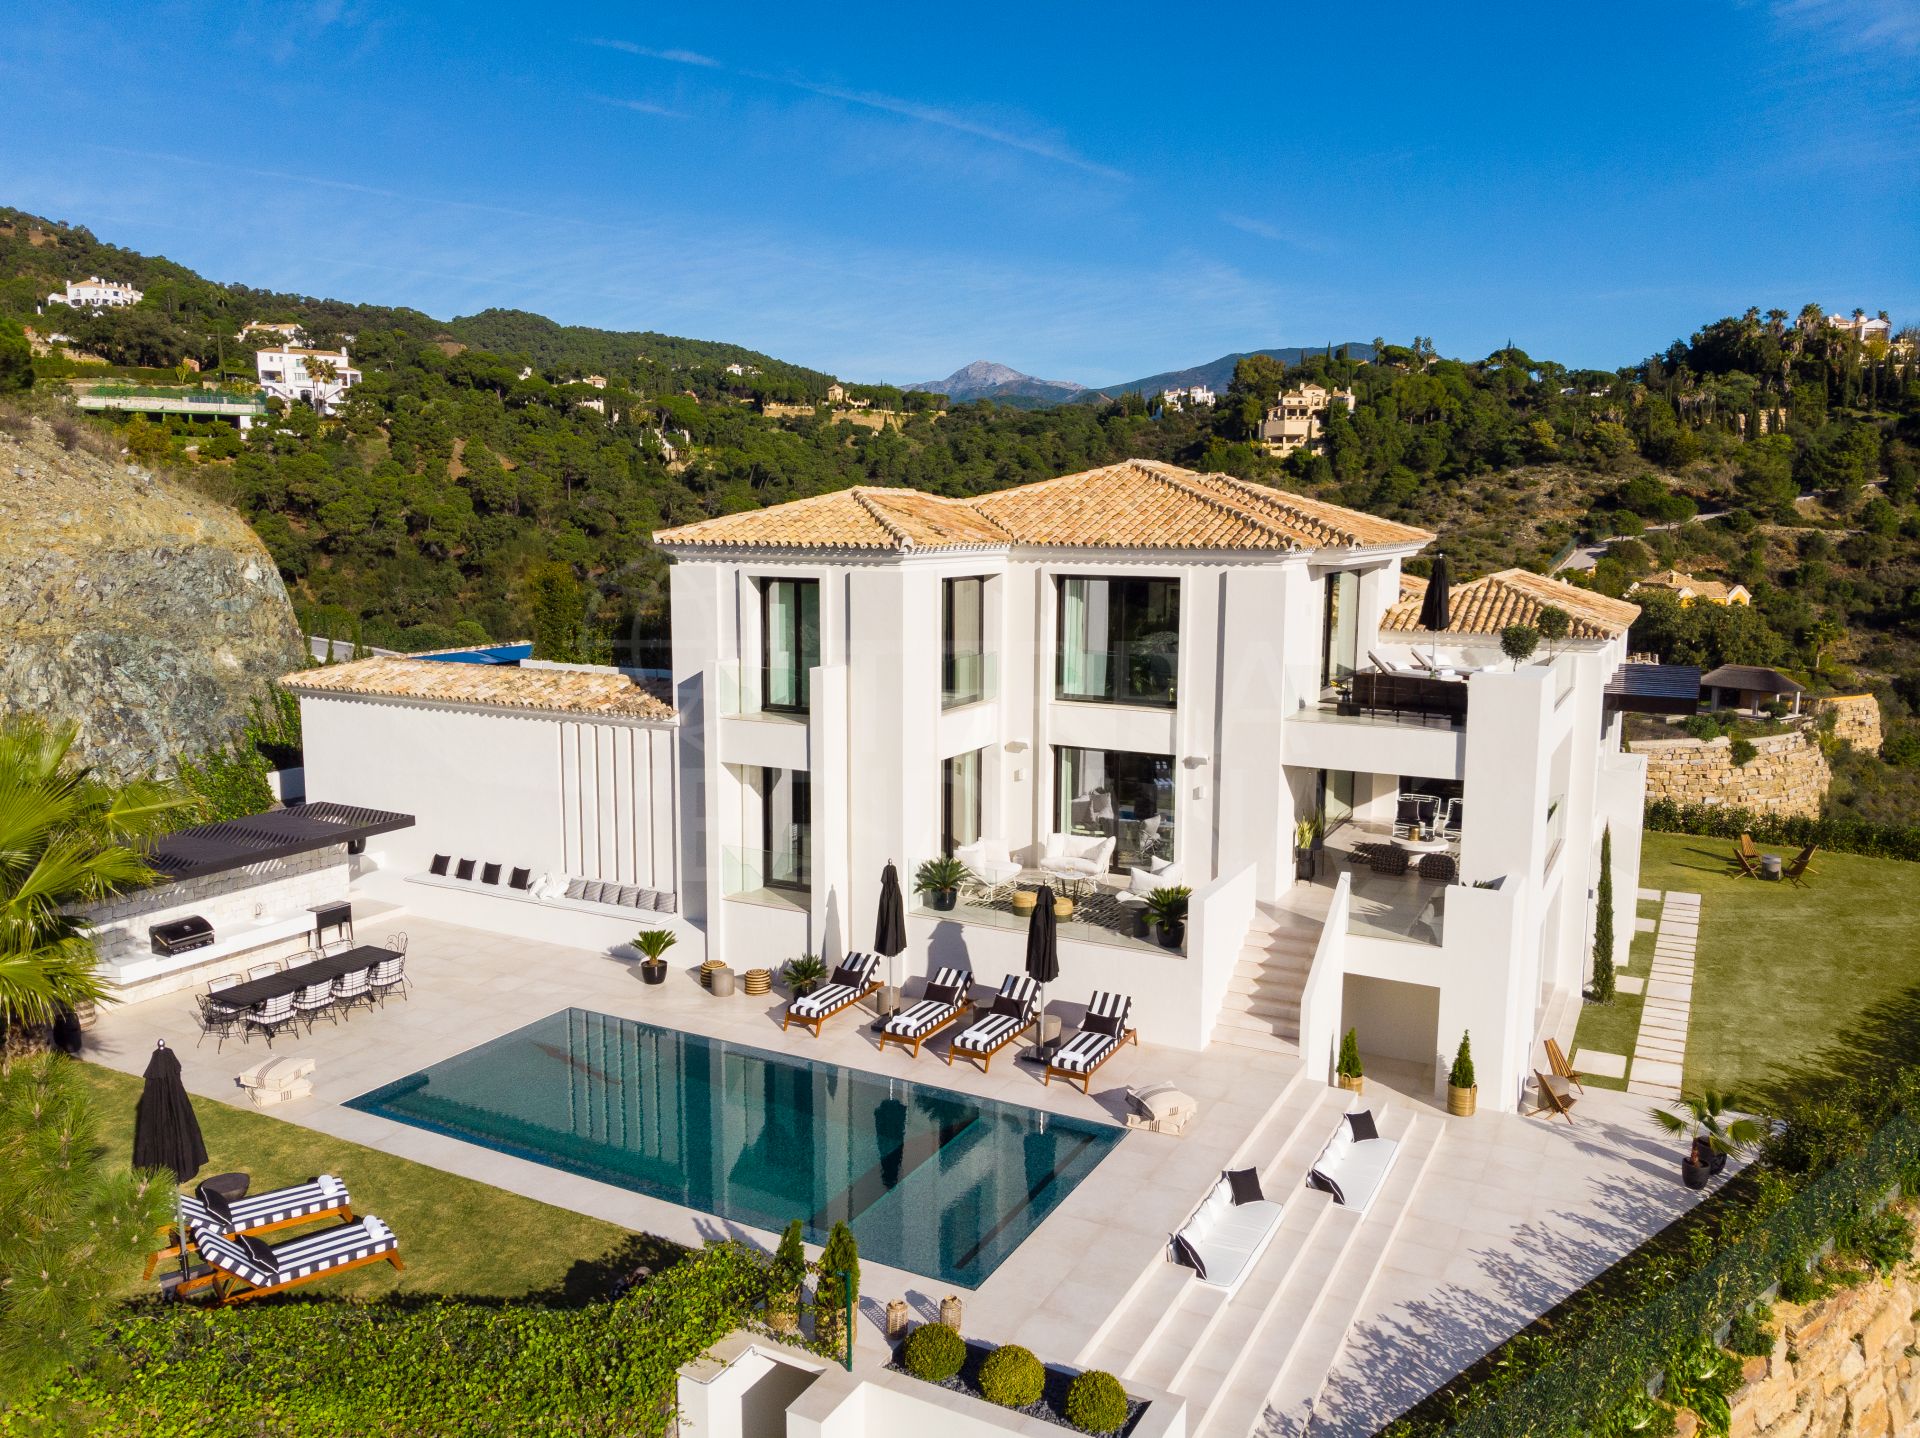 A striking trophy residence with scenic views for sale in the affluent private community of El Madroñal, Benahavis